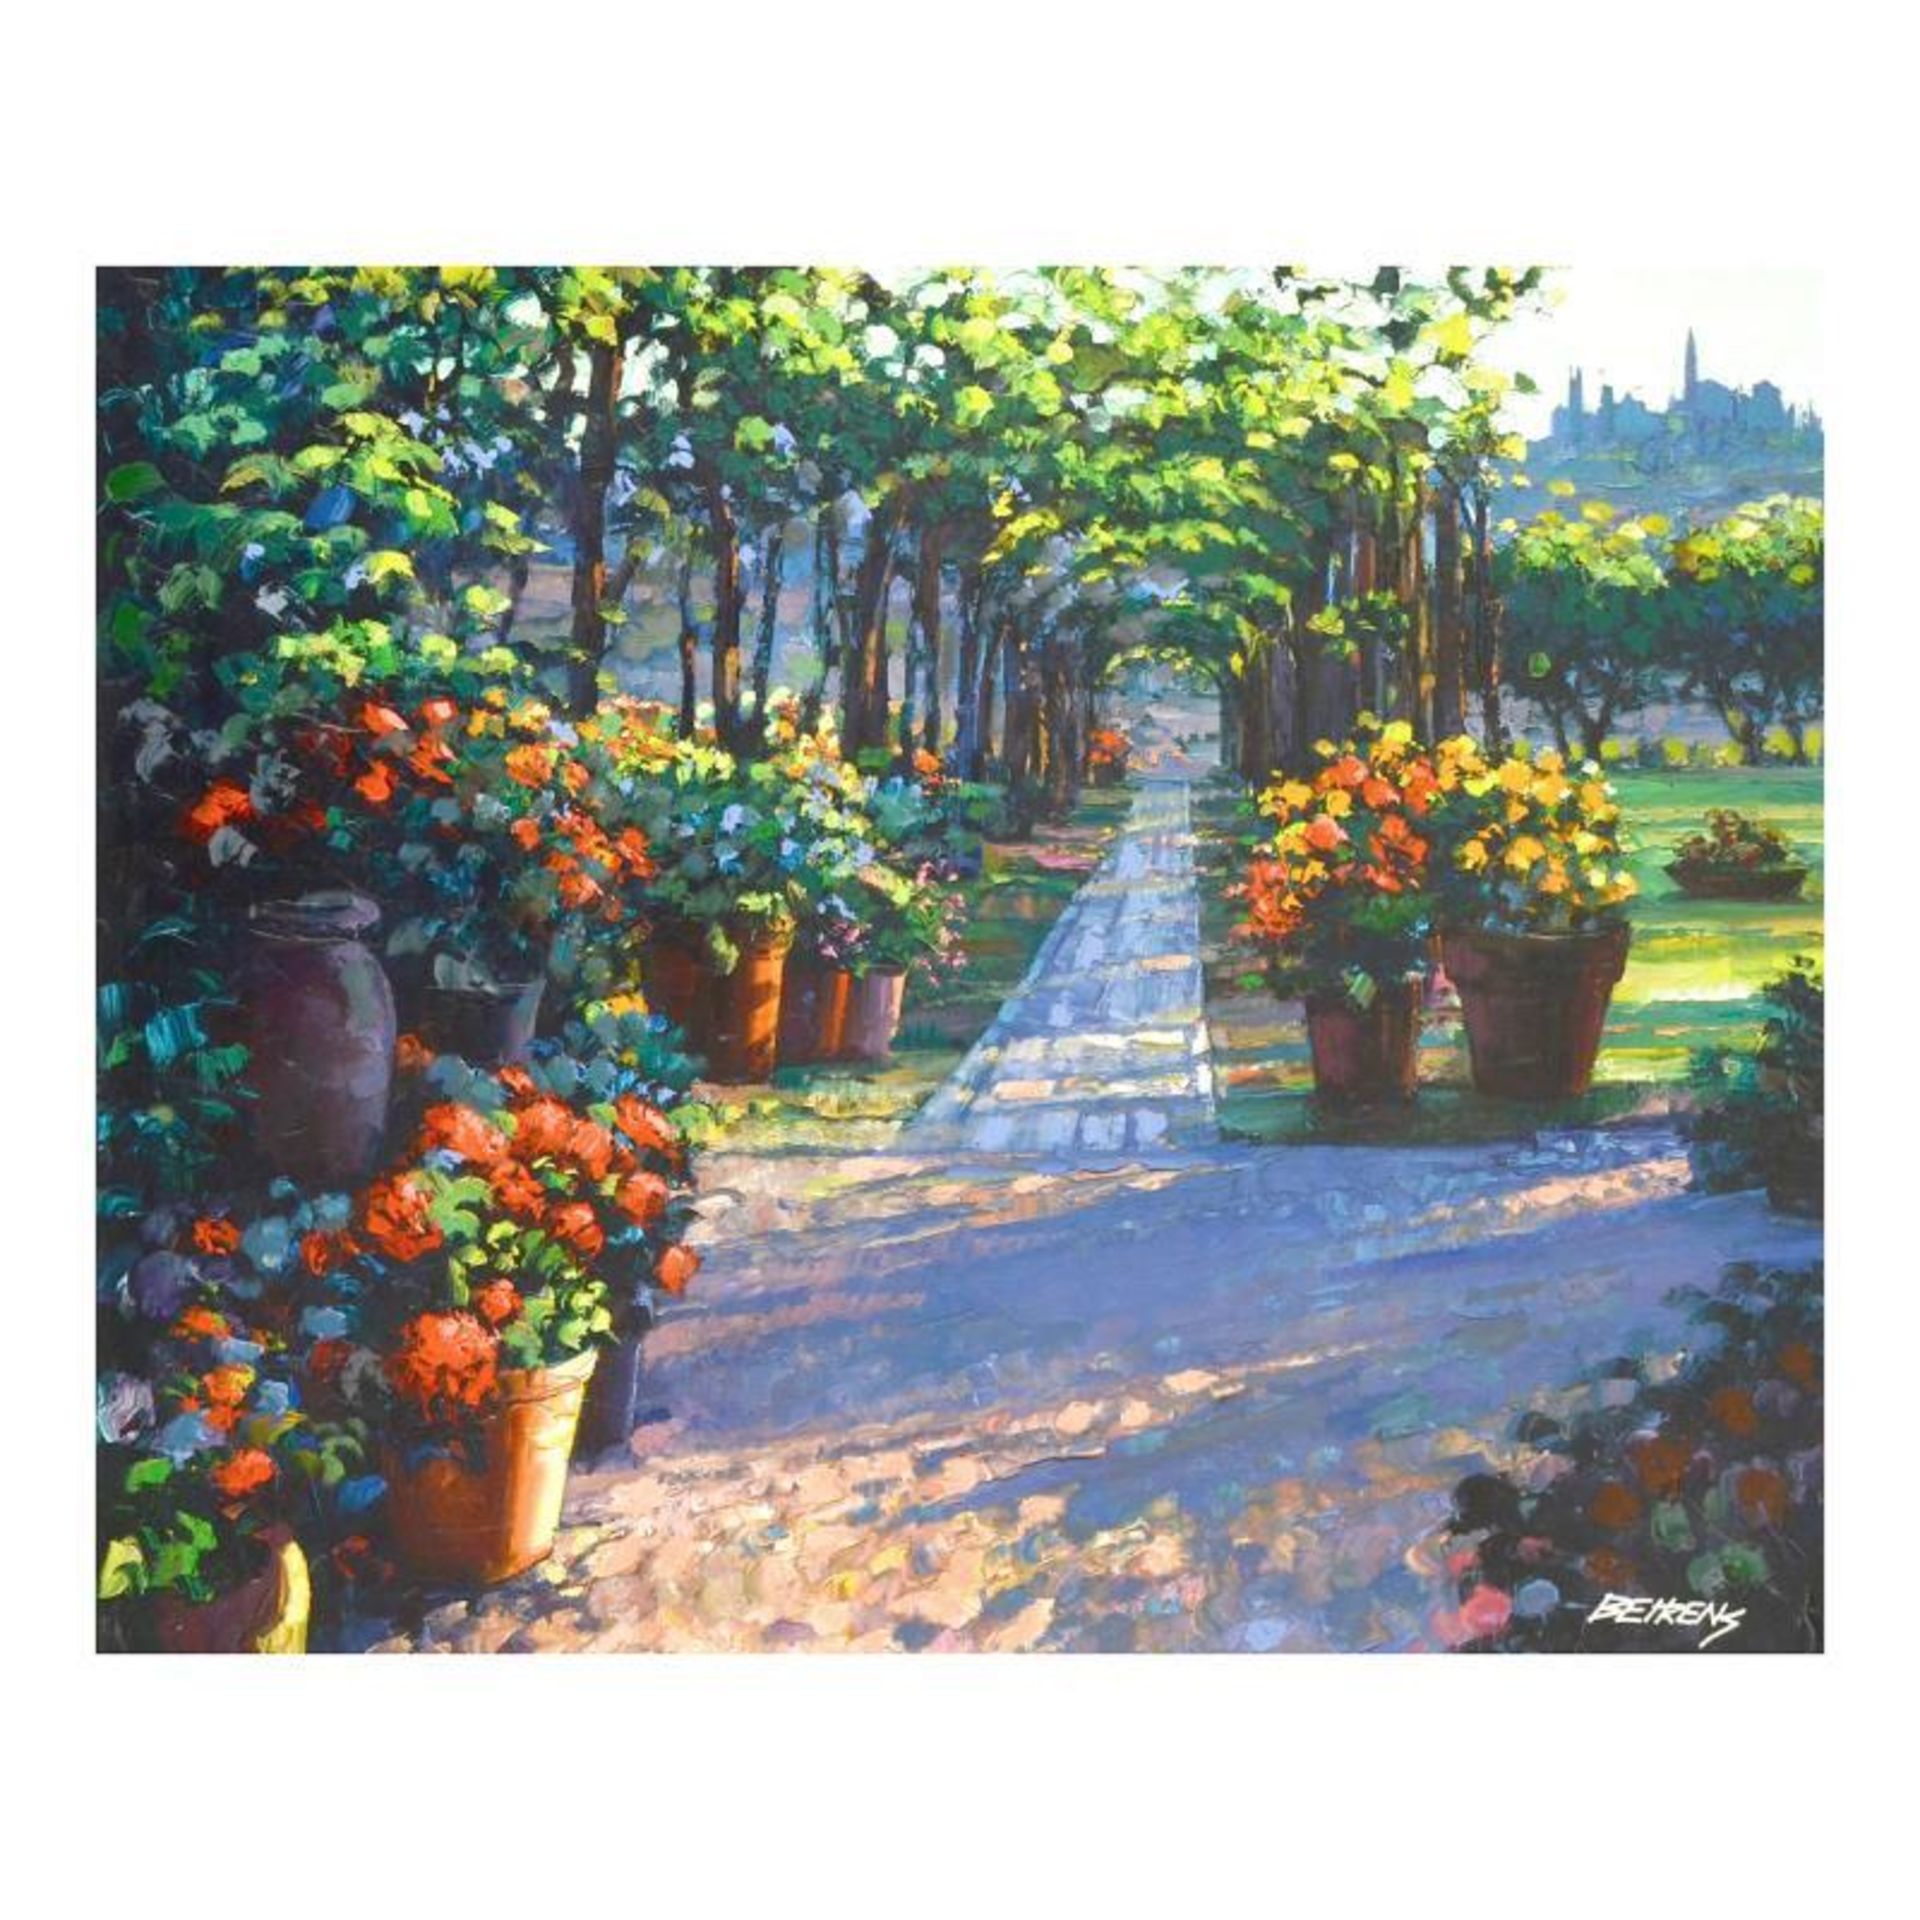 Howard Behrens (1933-2014), "Siena Arbor" Limited Edition on Canvas, Numbered an